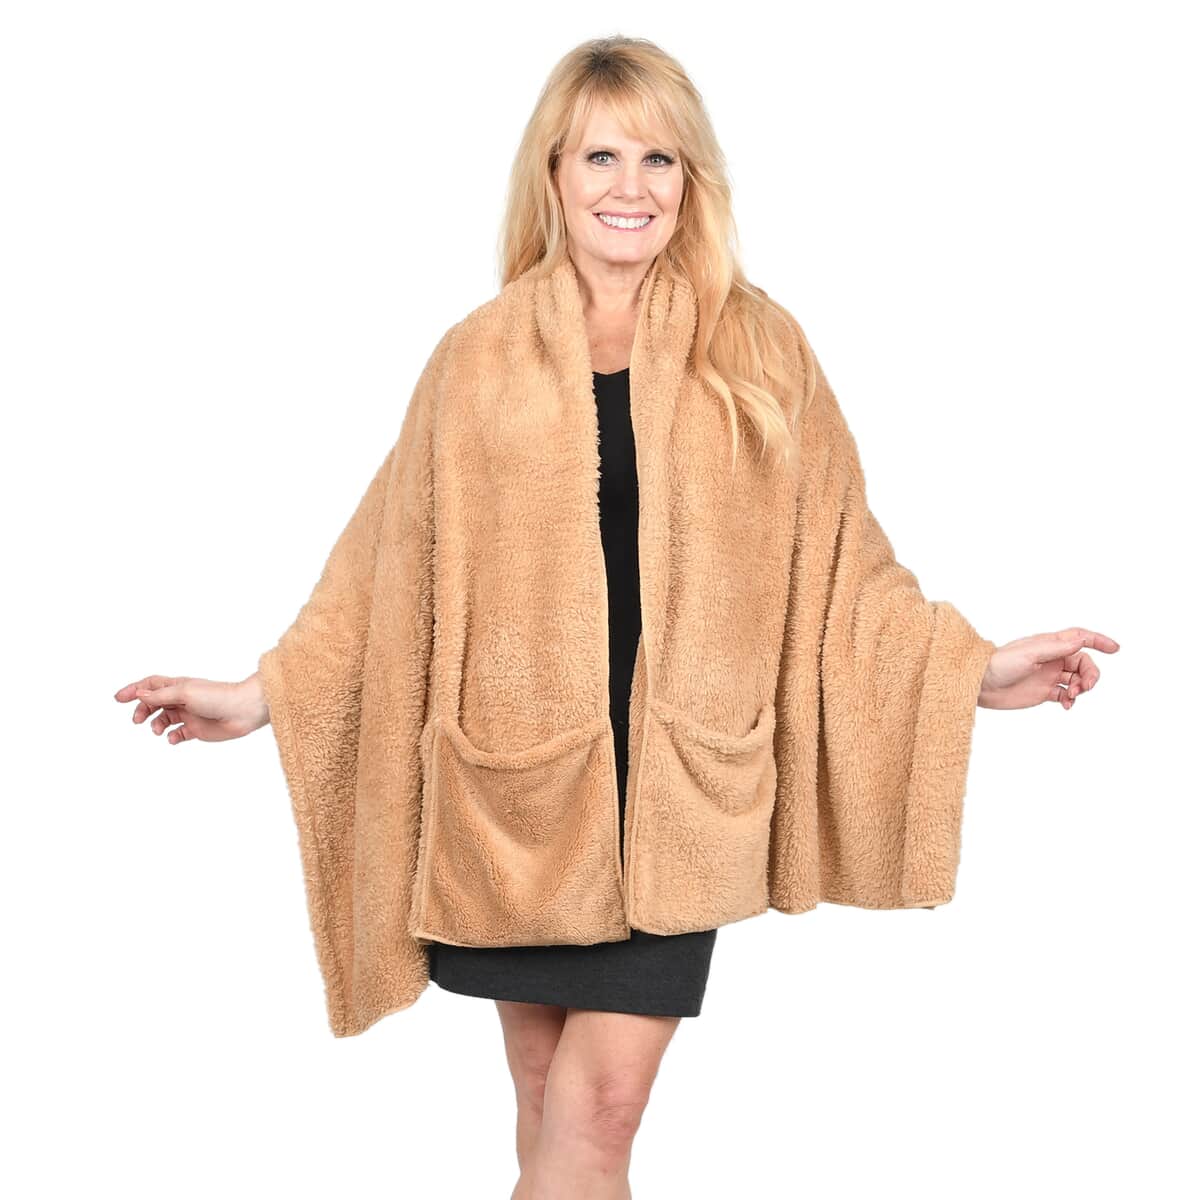 Social Grace Convertible Tan Travel Blanket Wrap with Pockets image number 1